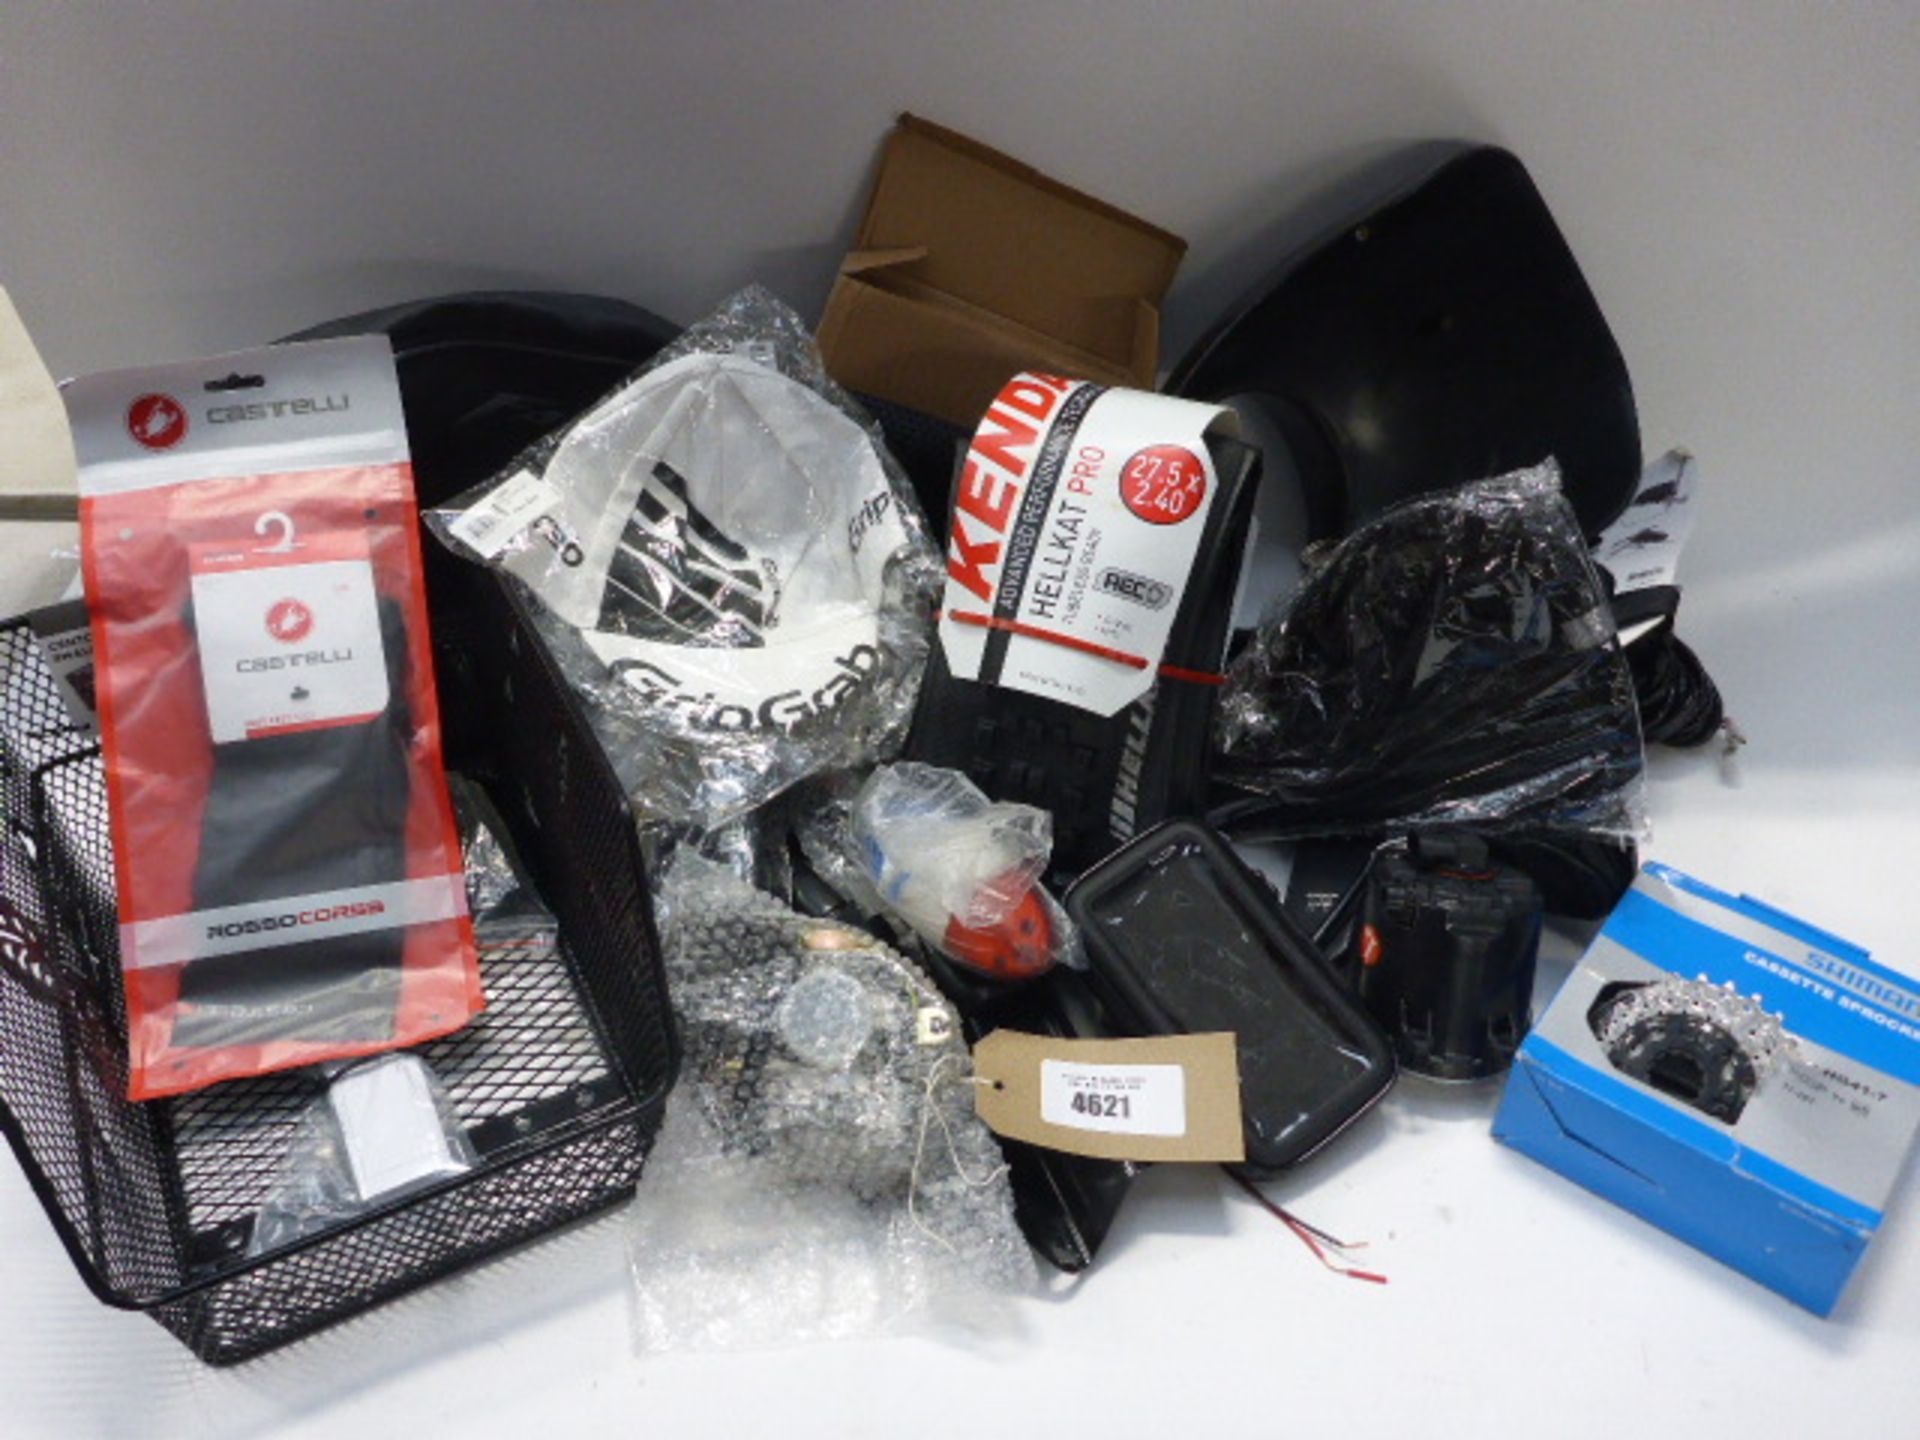 Bag containing bike and motorcycle parts, Shimano sprockets, tyres, hats, seat covers, lights etc